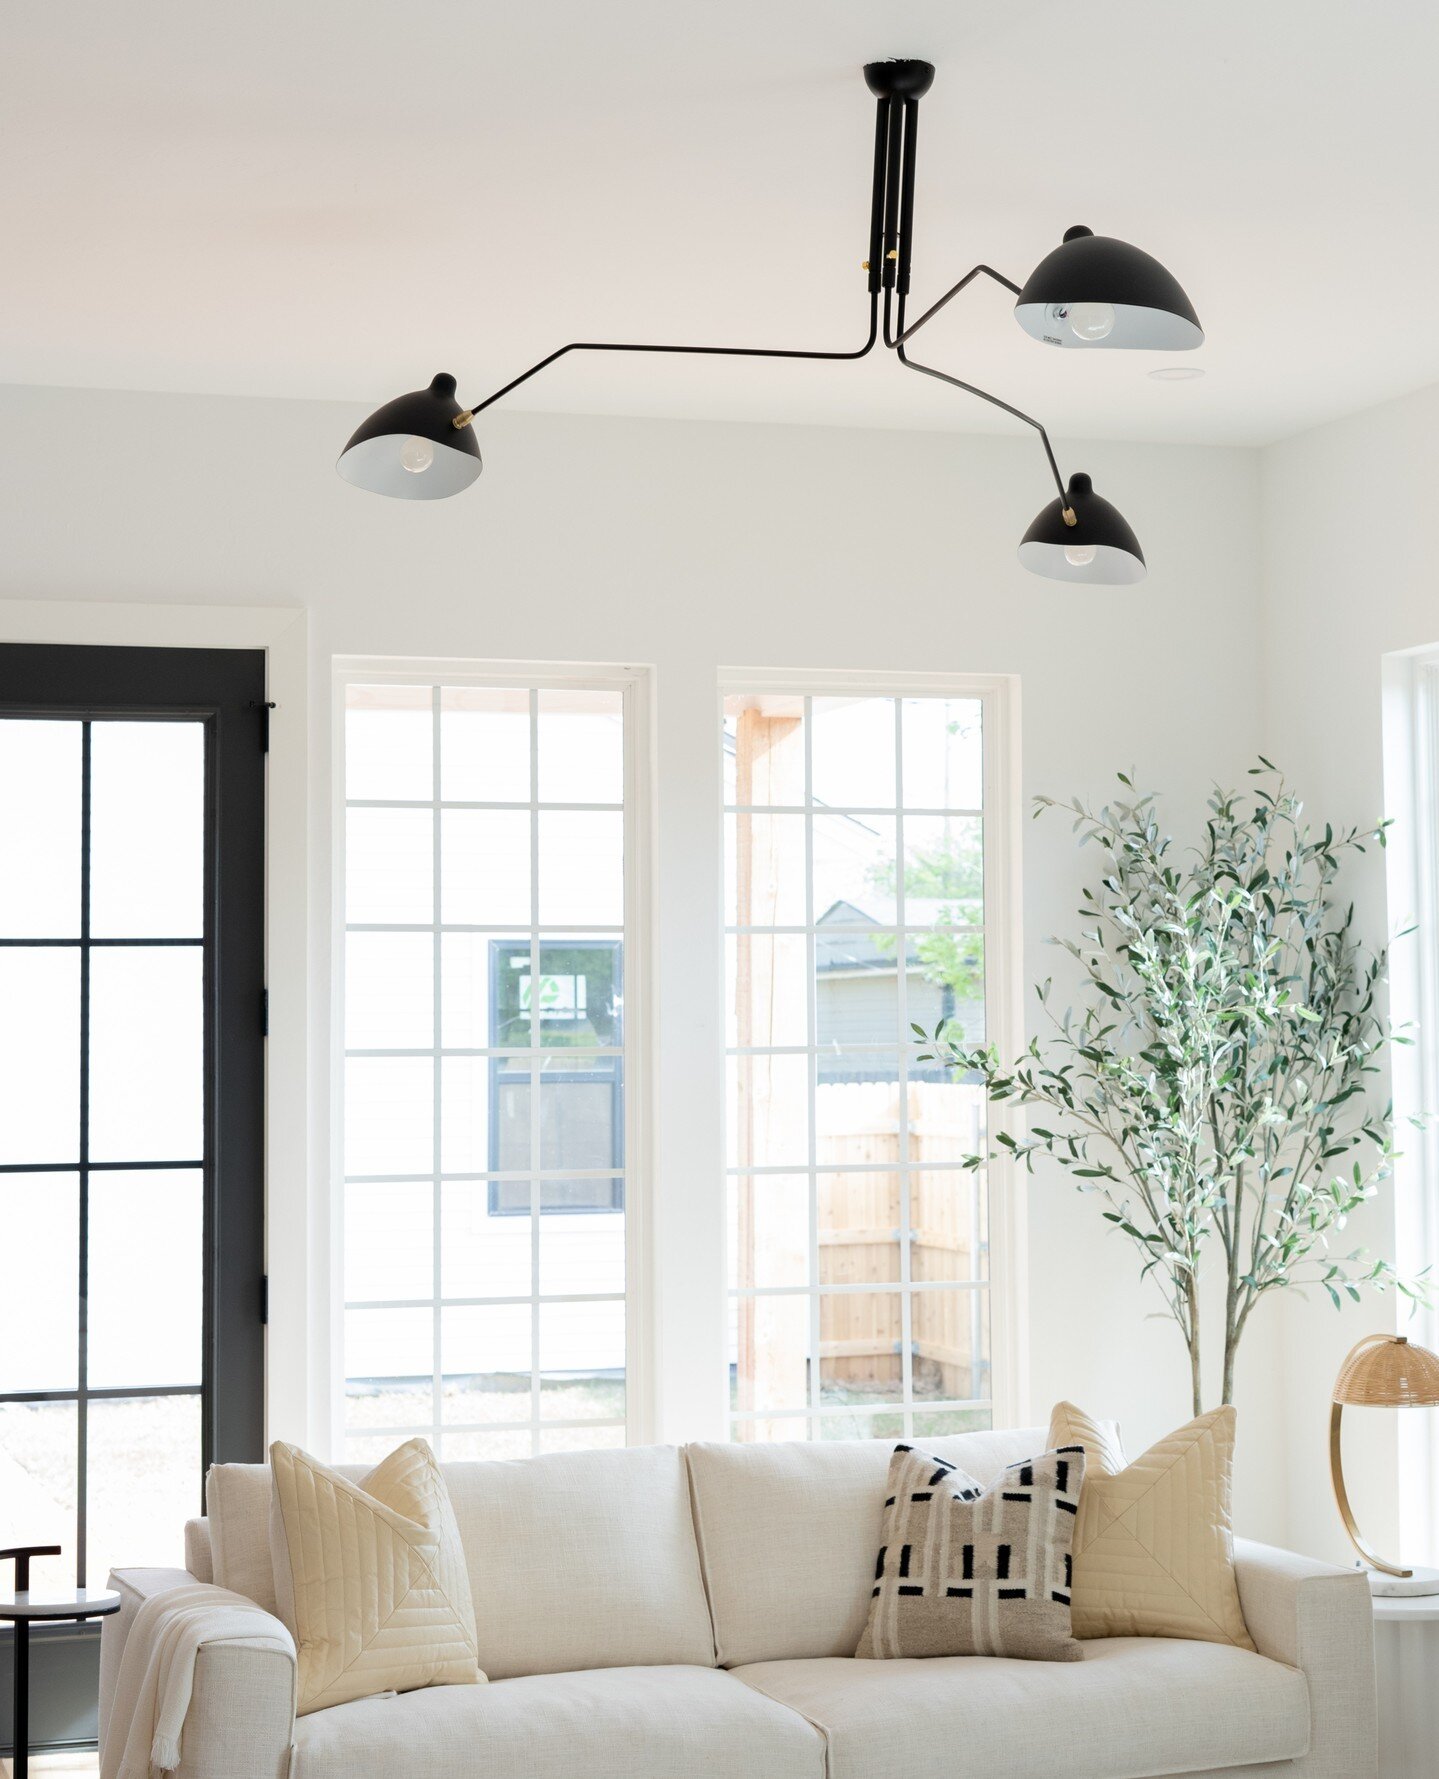 A good light can completely change the look and mood of a room! We love how much personality this black chandelier brought into the space.⁠
⁠
Designers: @flipokc @micahabbanantoandco @ryleeflowersdesigns⁠
Design Firm: @micahabbanantoandco⁠
Build: @fl